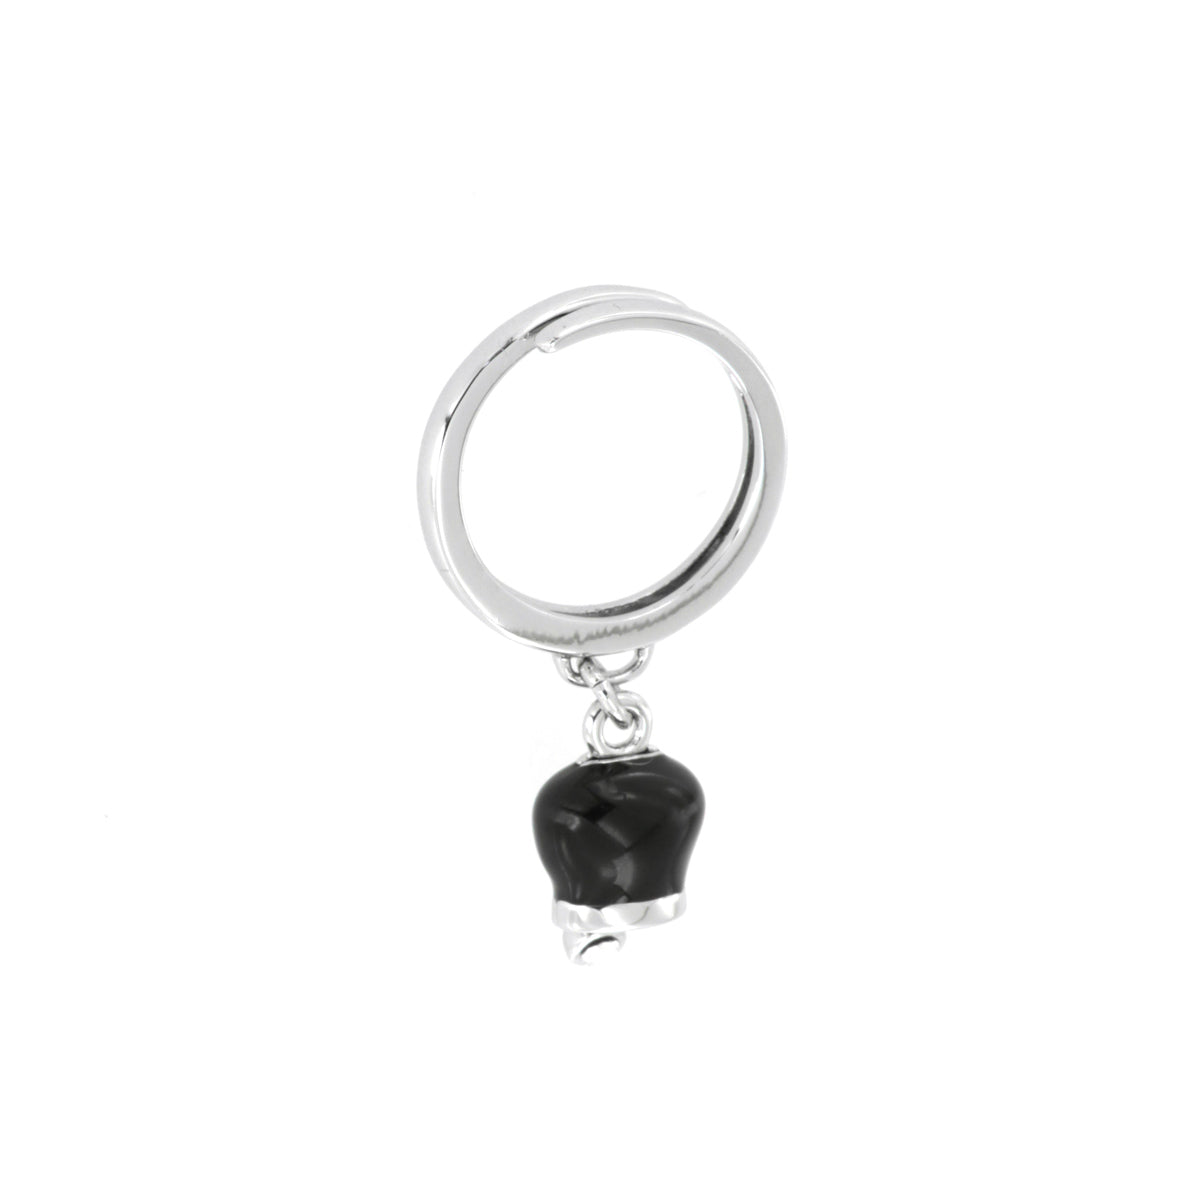 Metal ring with pendant lucky charm, embellished with black enamel and light point